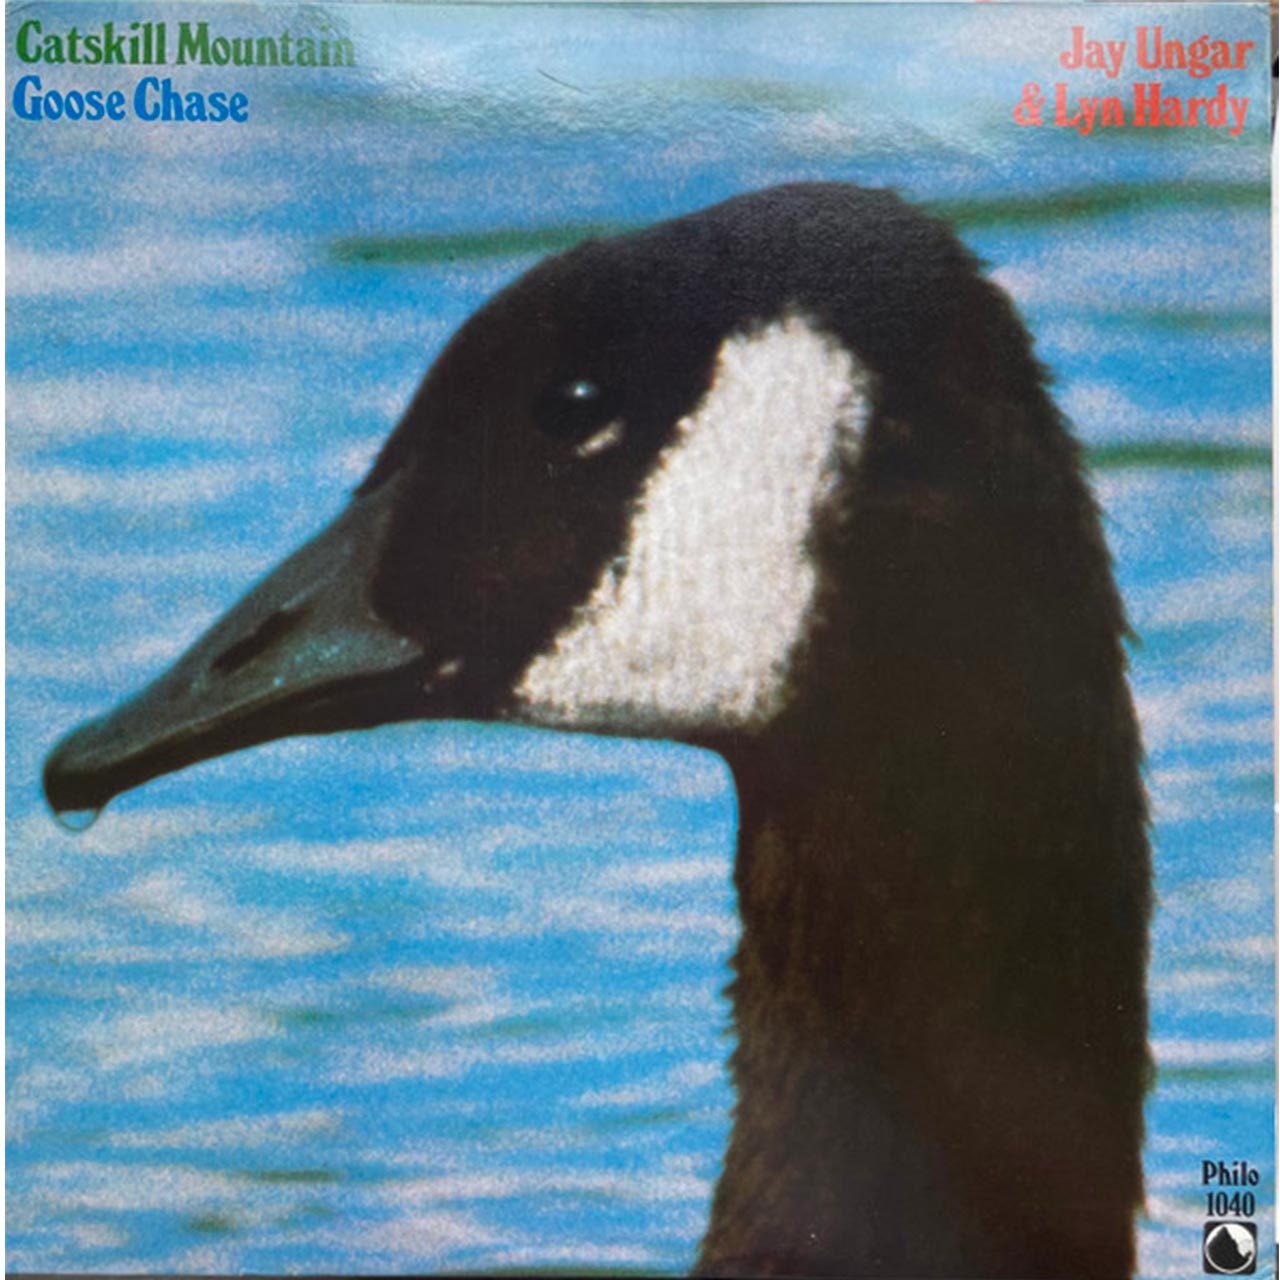 Jay Ungar – Catskill Mountain Goose Chase cover album